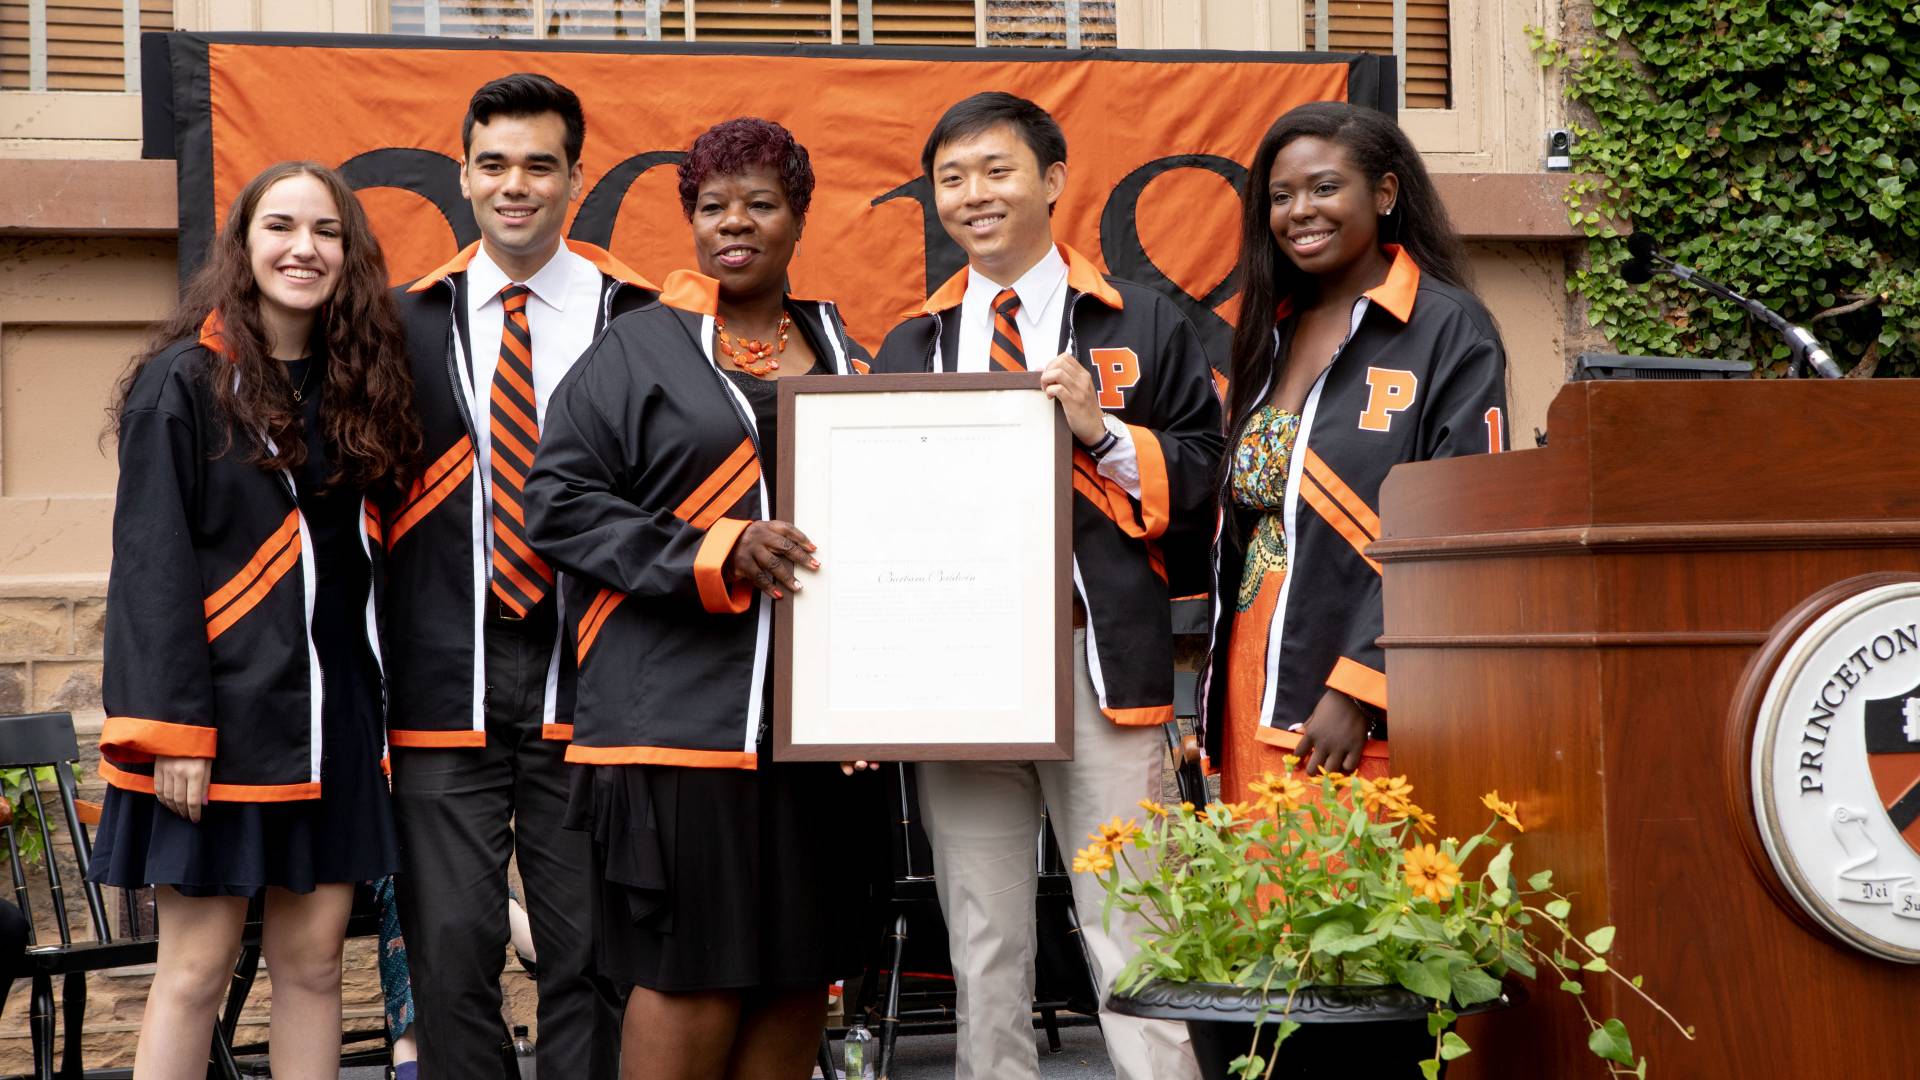 Barbara Baldwin receiving Class of 2018 Class Day jacket and certificate during Class Day ceremony